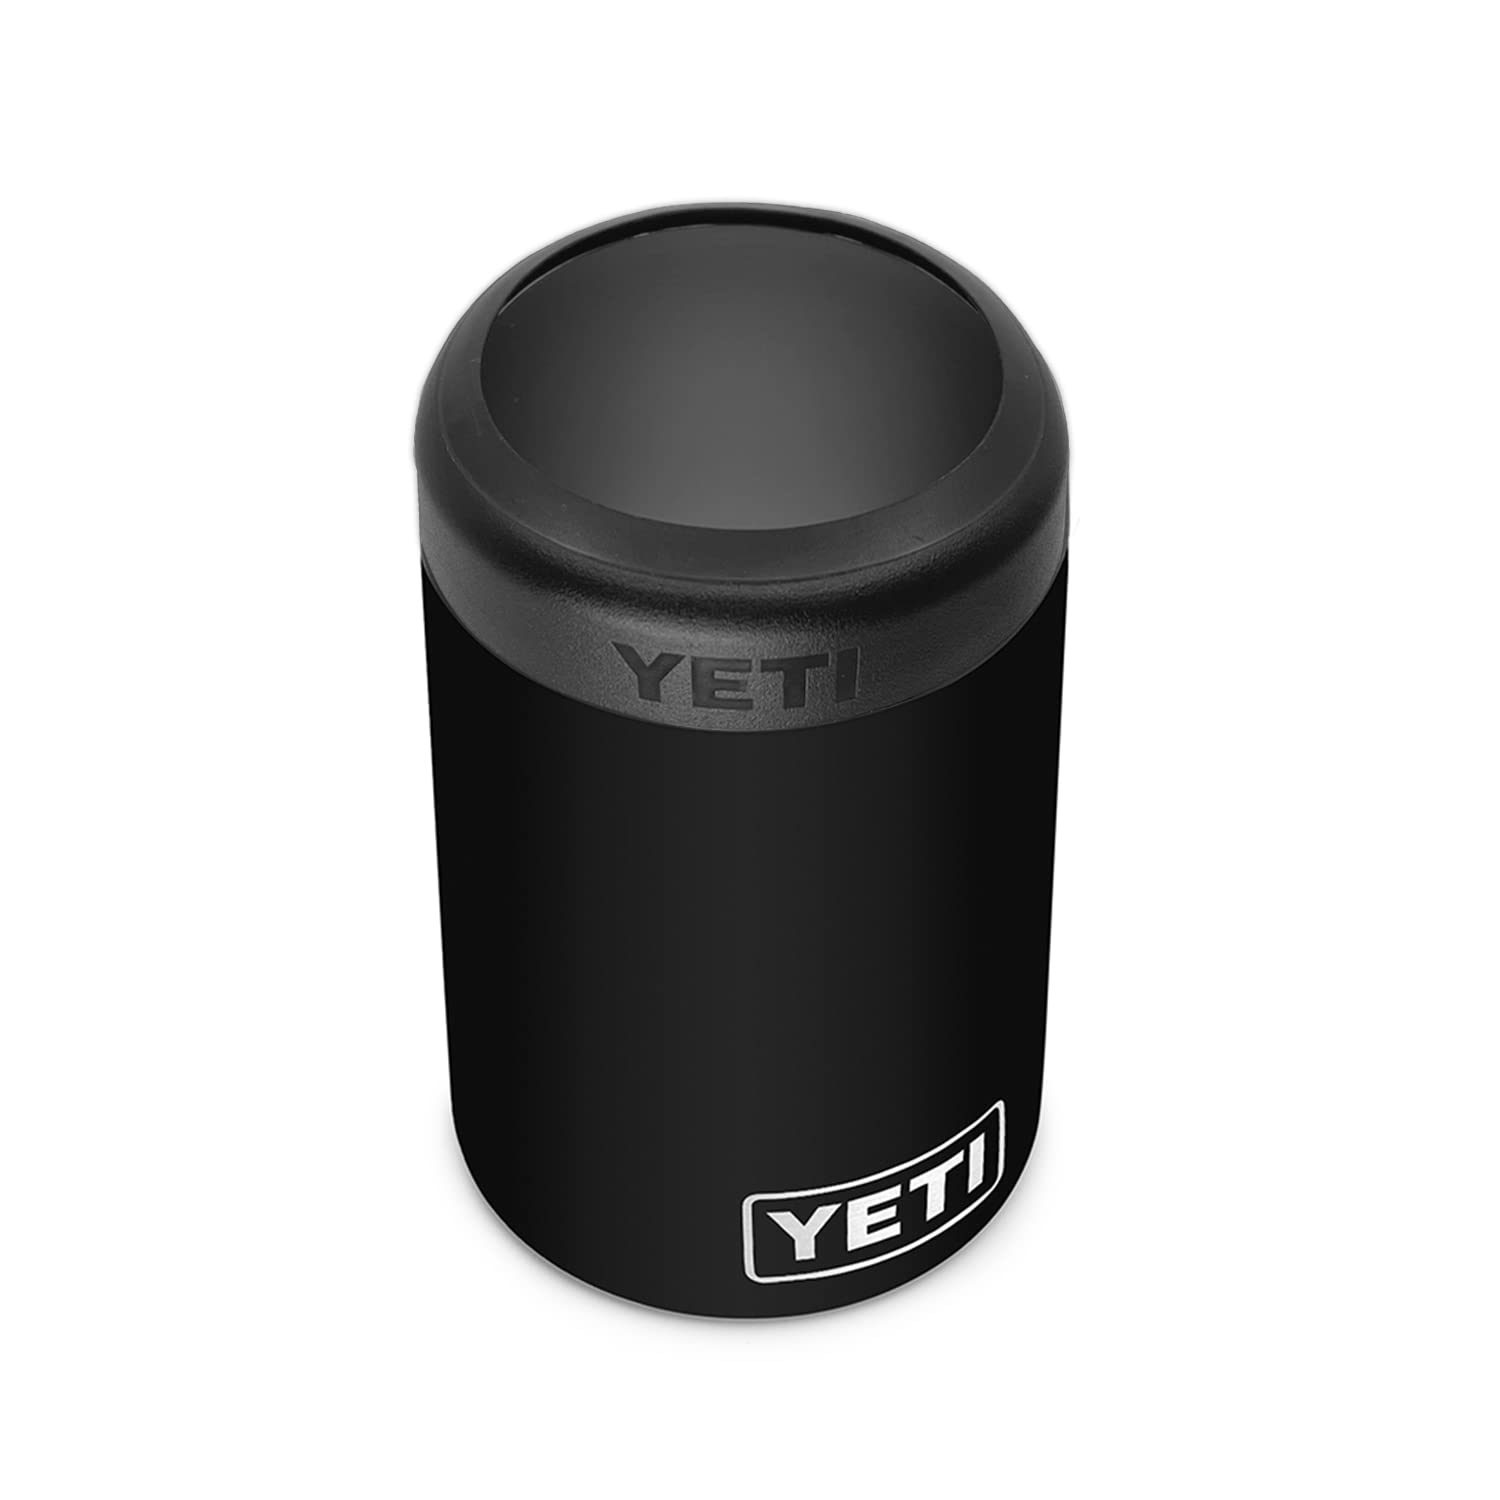 Yeti Rambler 12 oz. Colster Can Insulator for Standard Size Cans